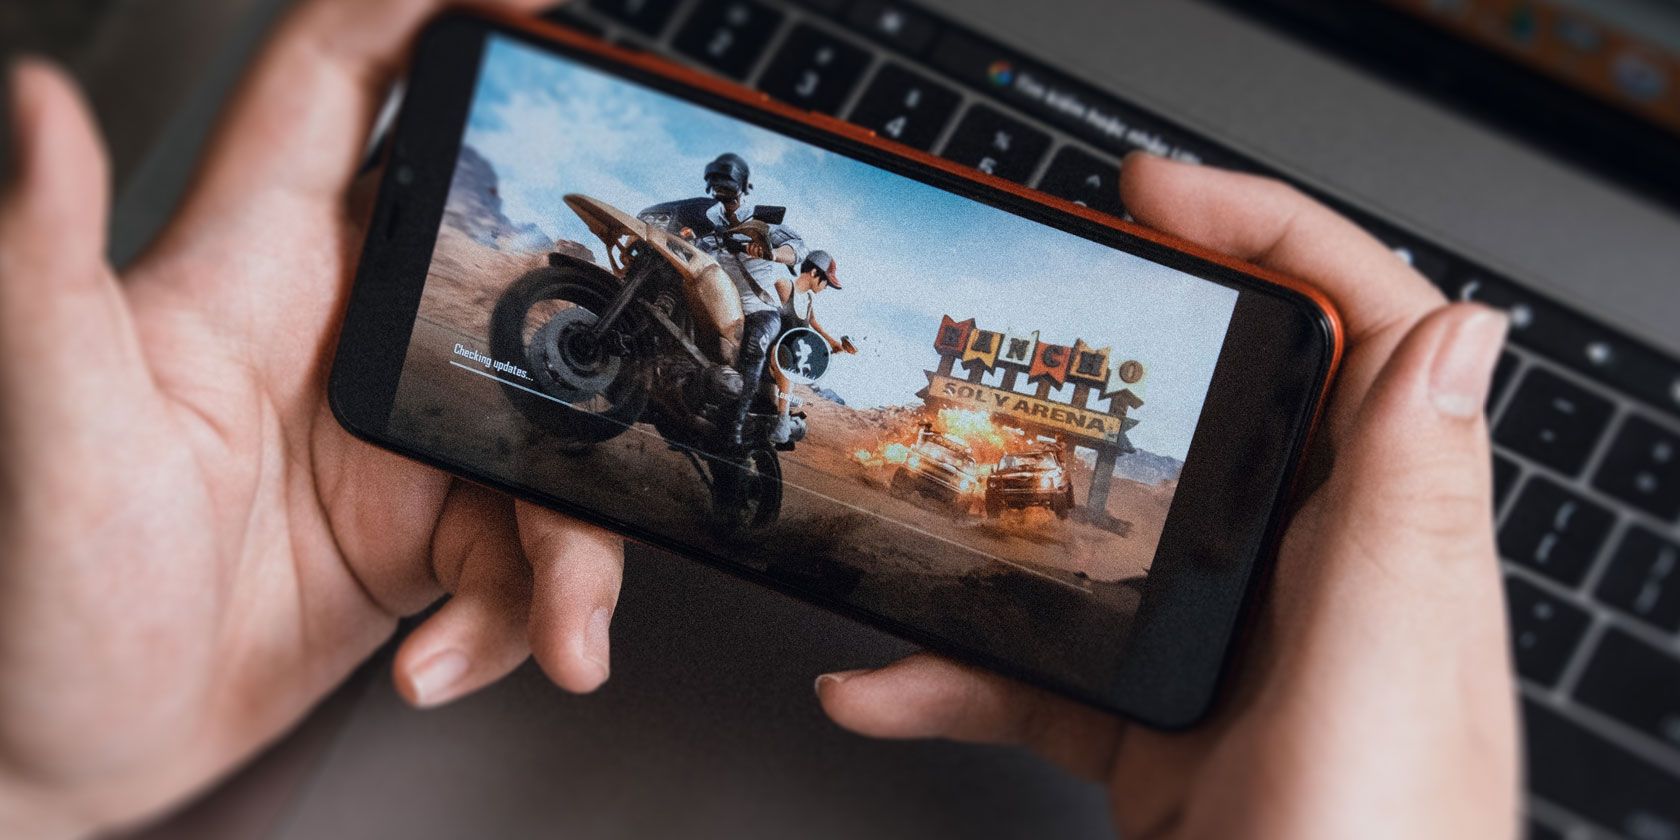 7 Ways to Find New Mobile Games Worth Playing